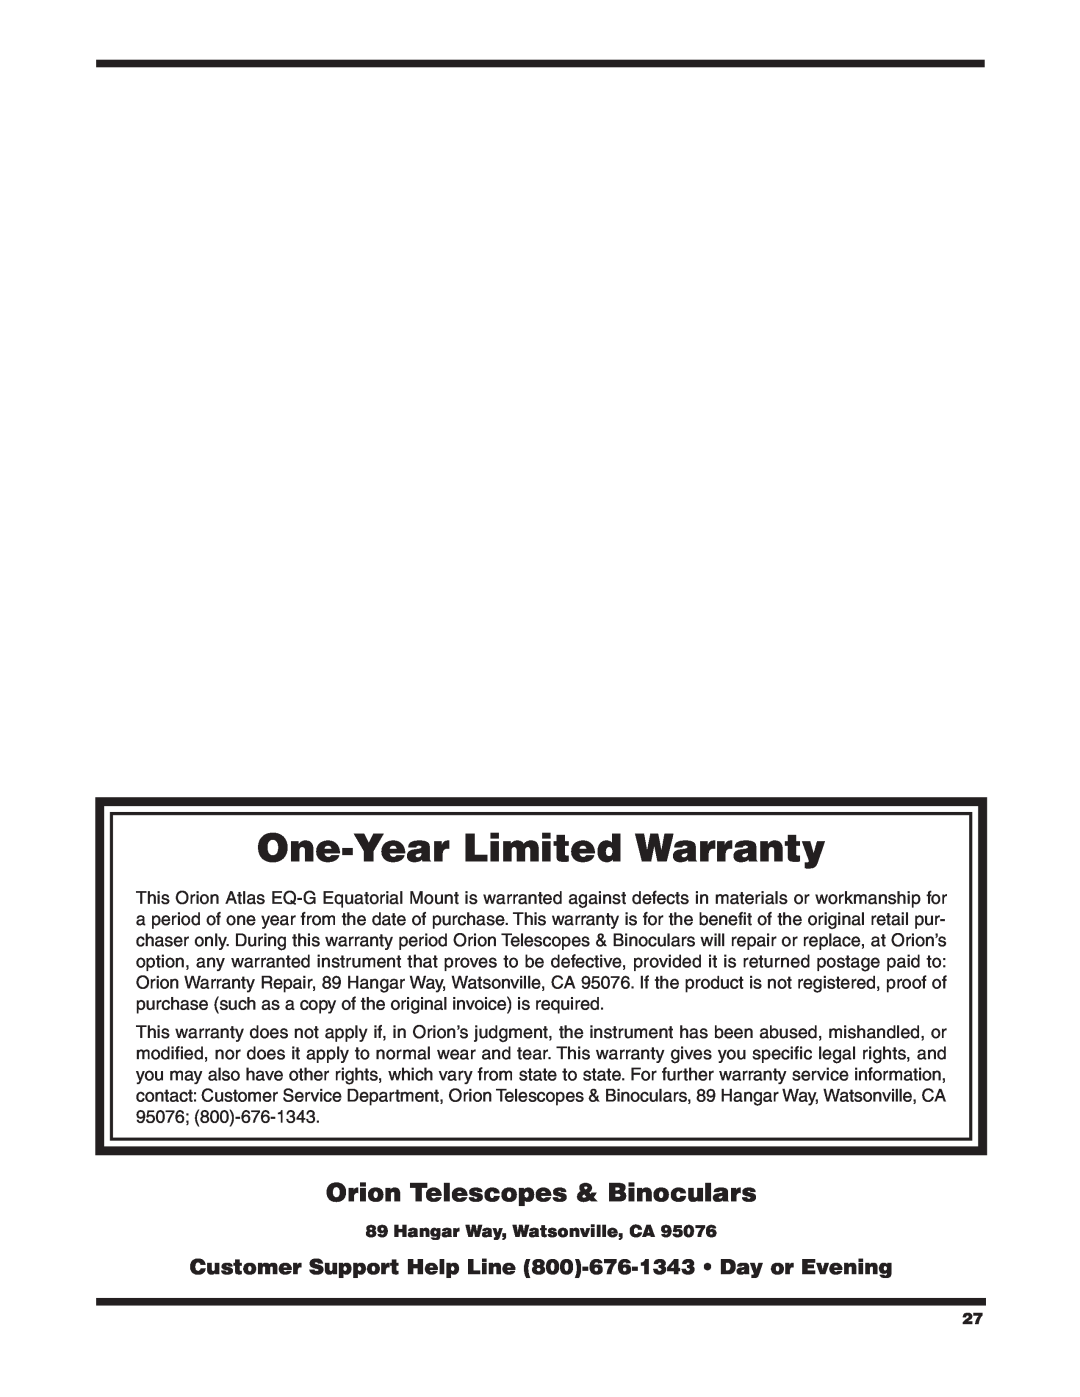 Orion EQ-G One-Year Limited Warranty, Customer Support Help Line 800‑676-1343 Day or Evening, Hangar Way, Watsonville, CA 